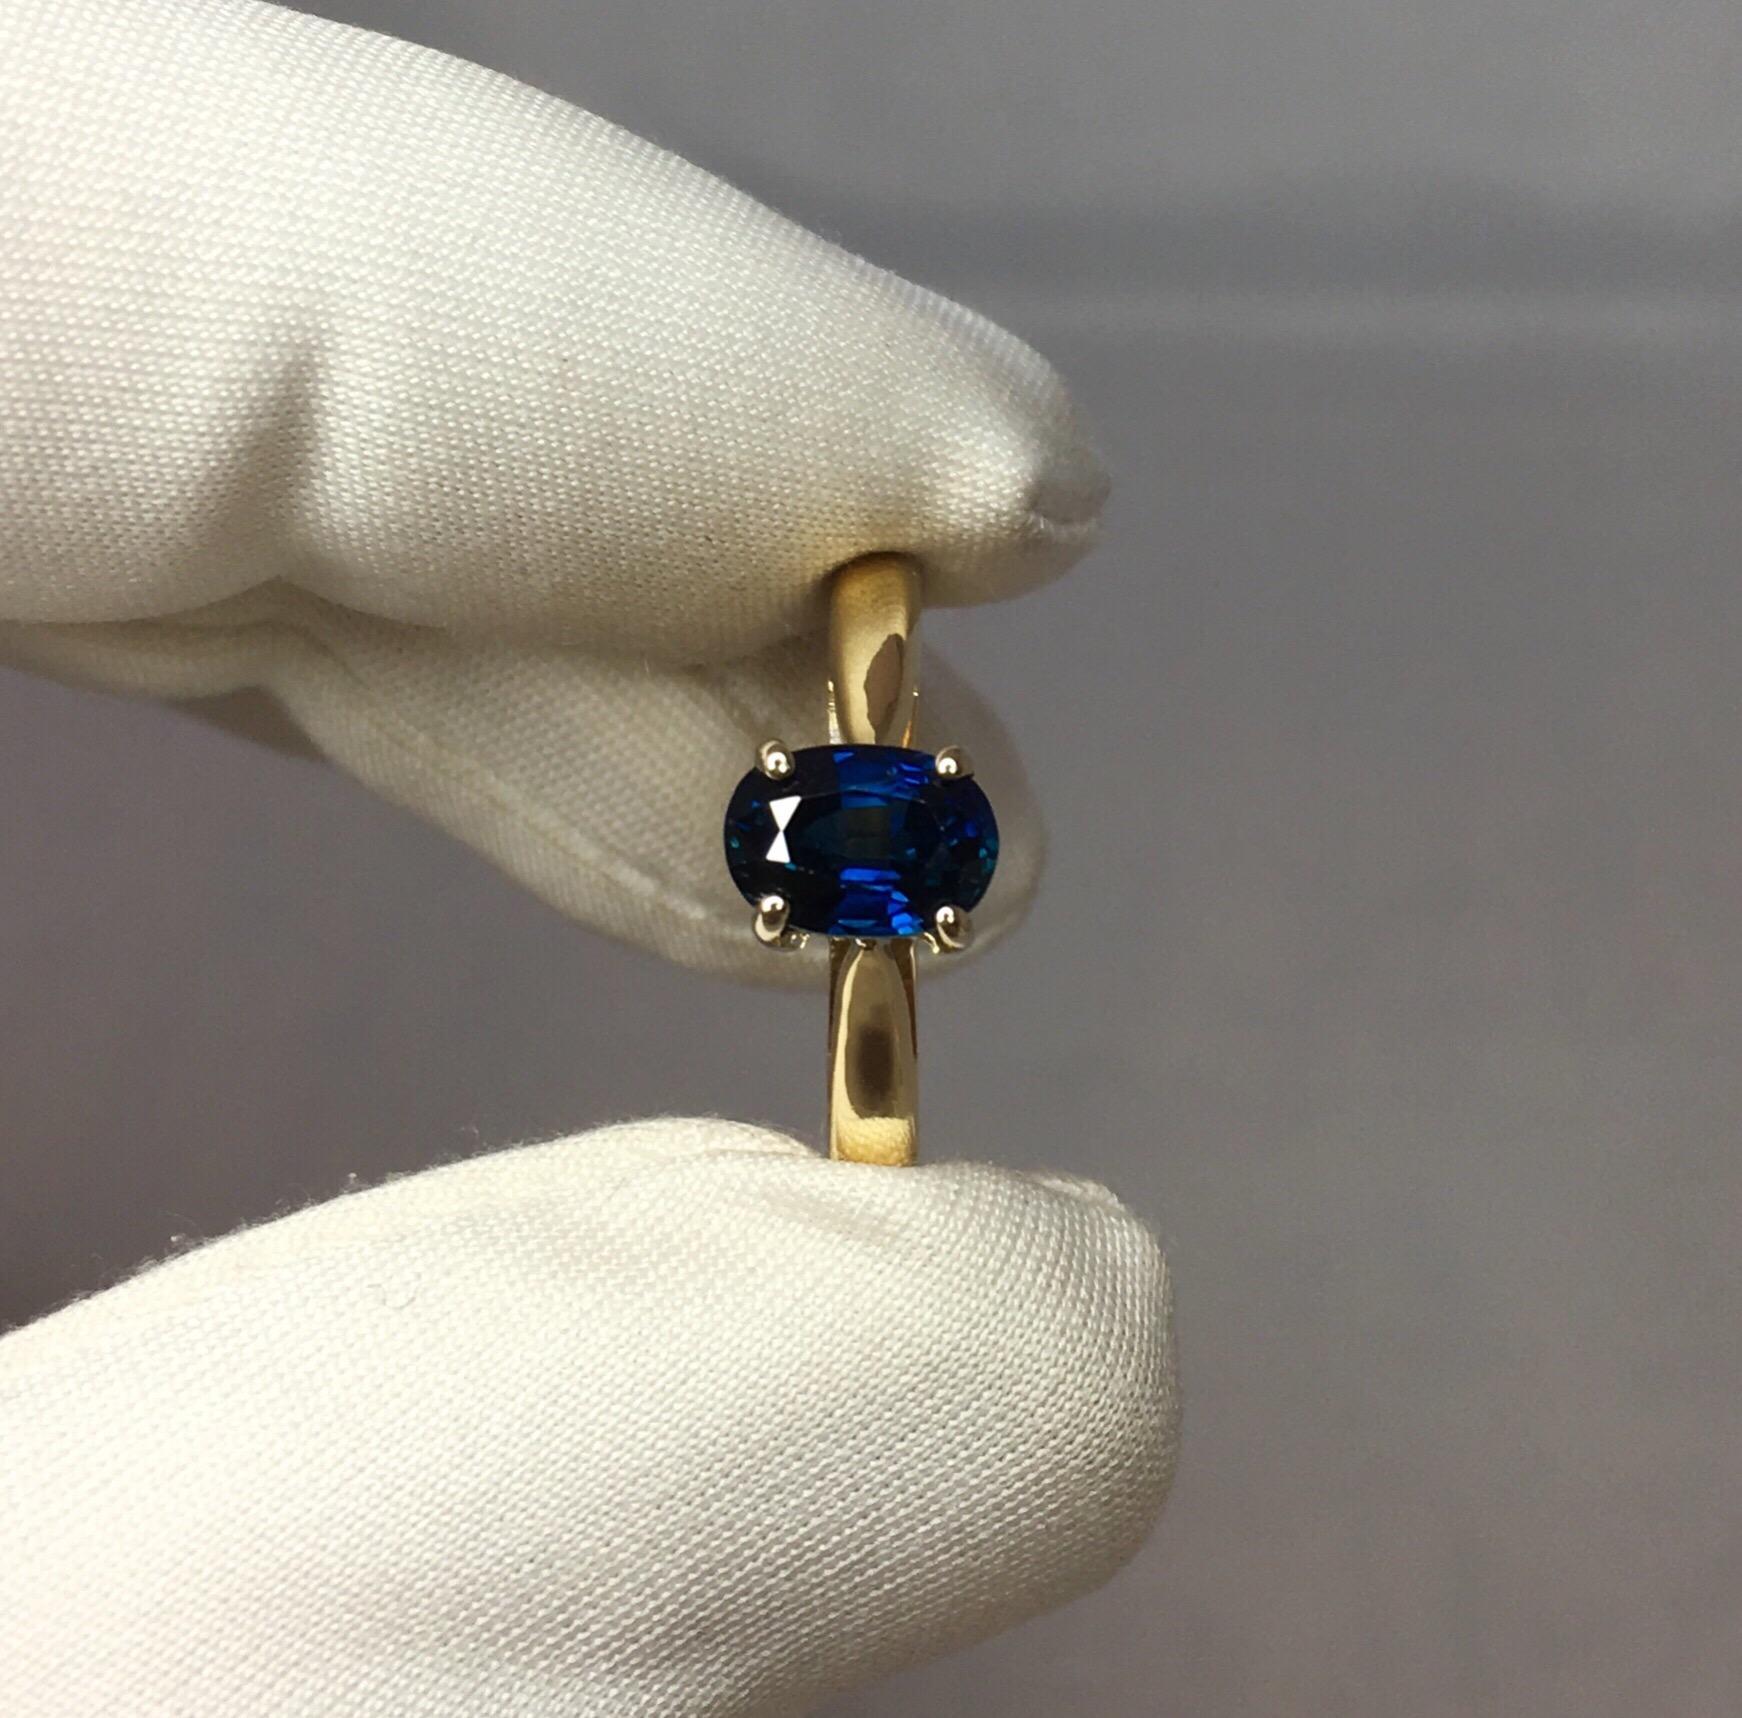 Stunning natural deep blue sapphire set in a beautiful 18k multi-tone gold solitaire ring. 

1.25 carat stone with a stunning deep blue colour and very good clarity. Clean stone with only some small inclusions visible when looking closely.
Also has